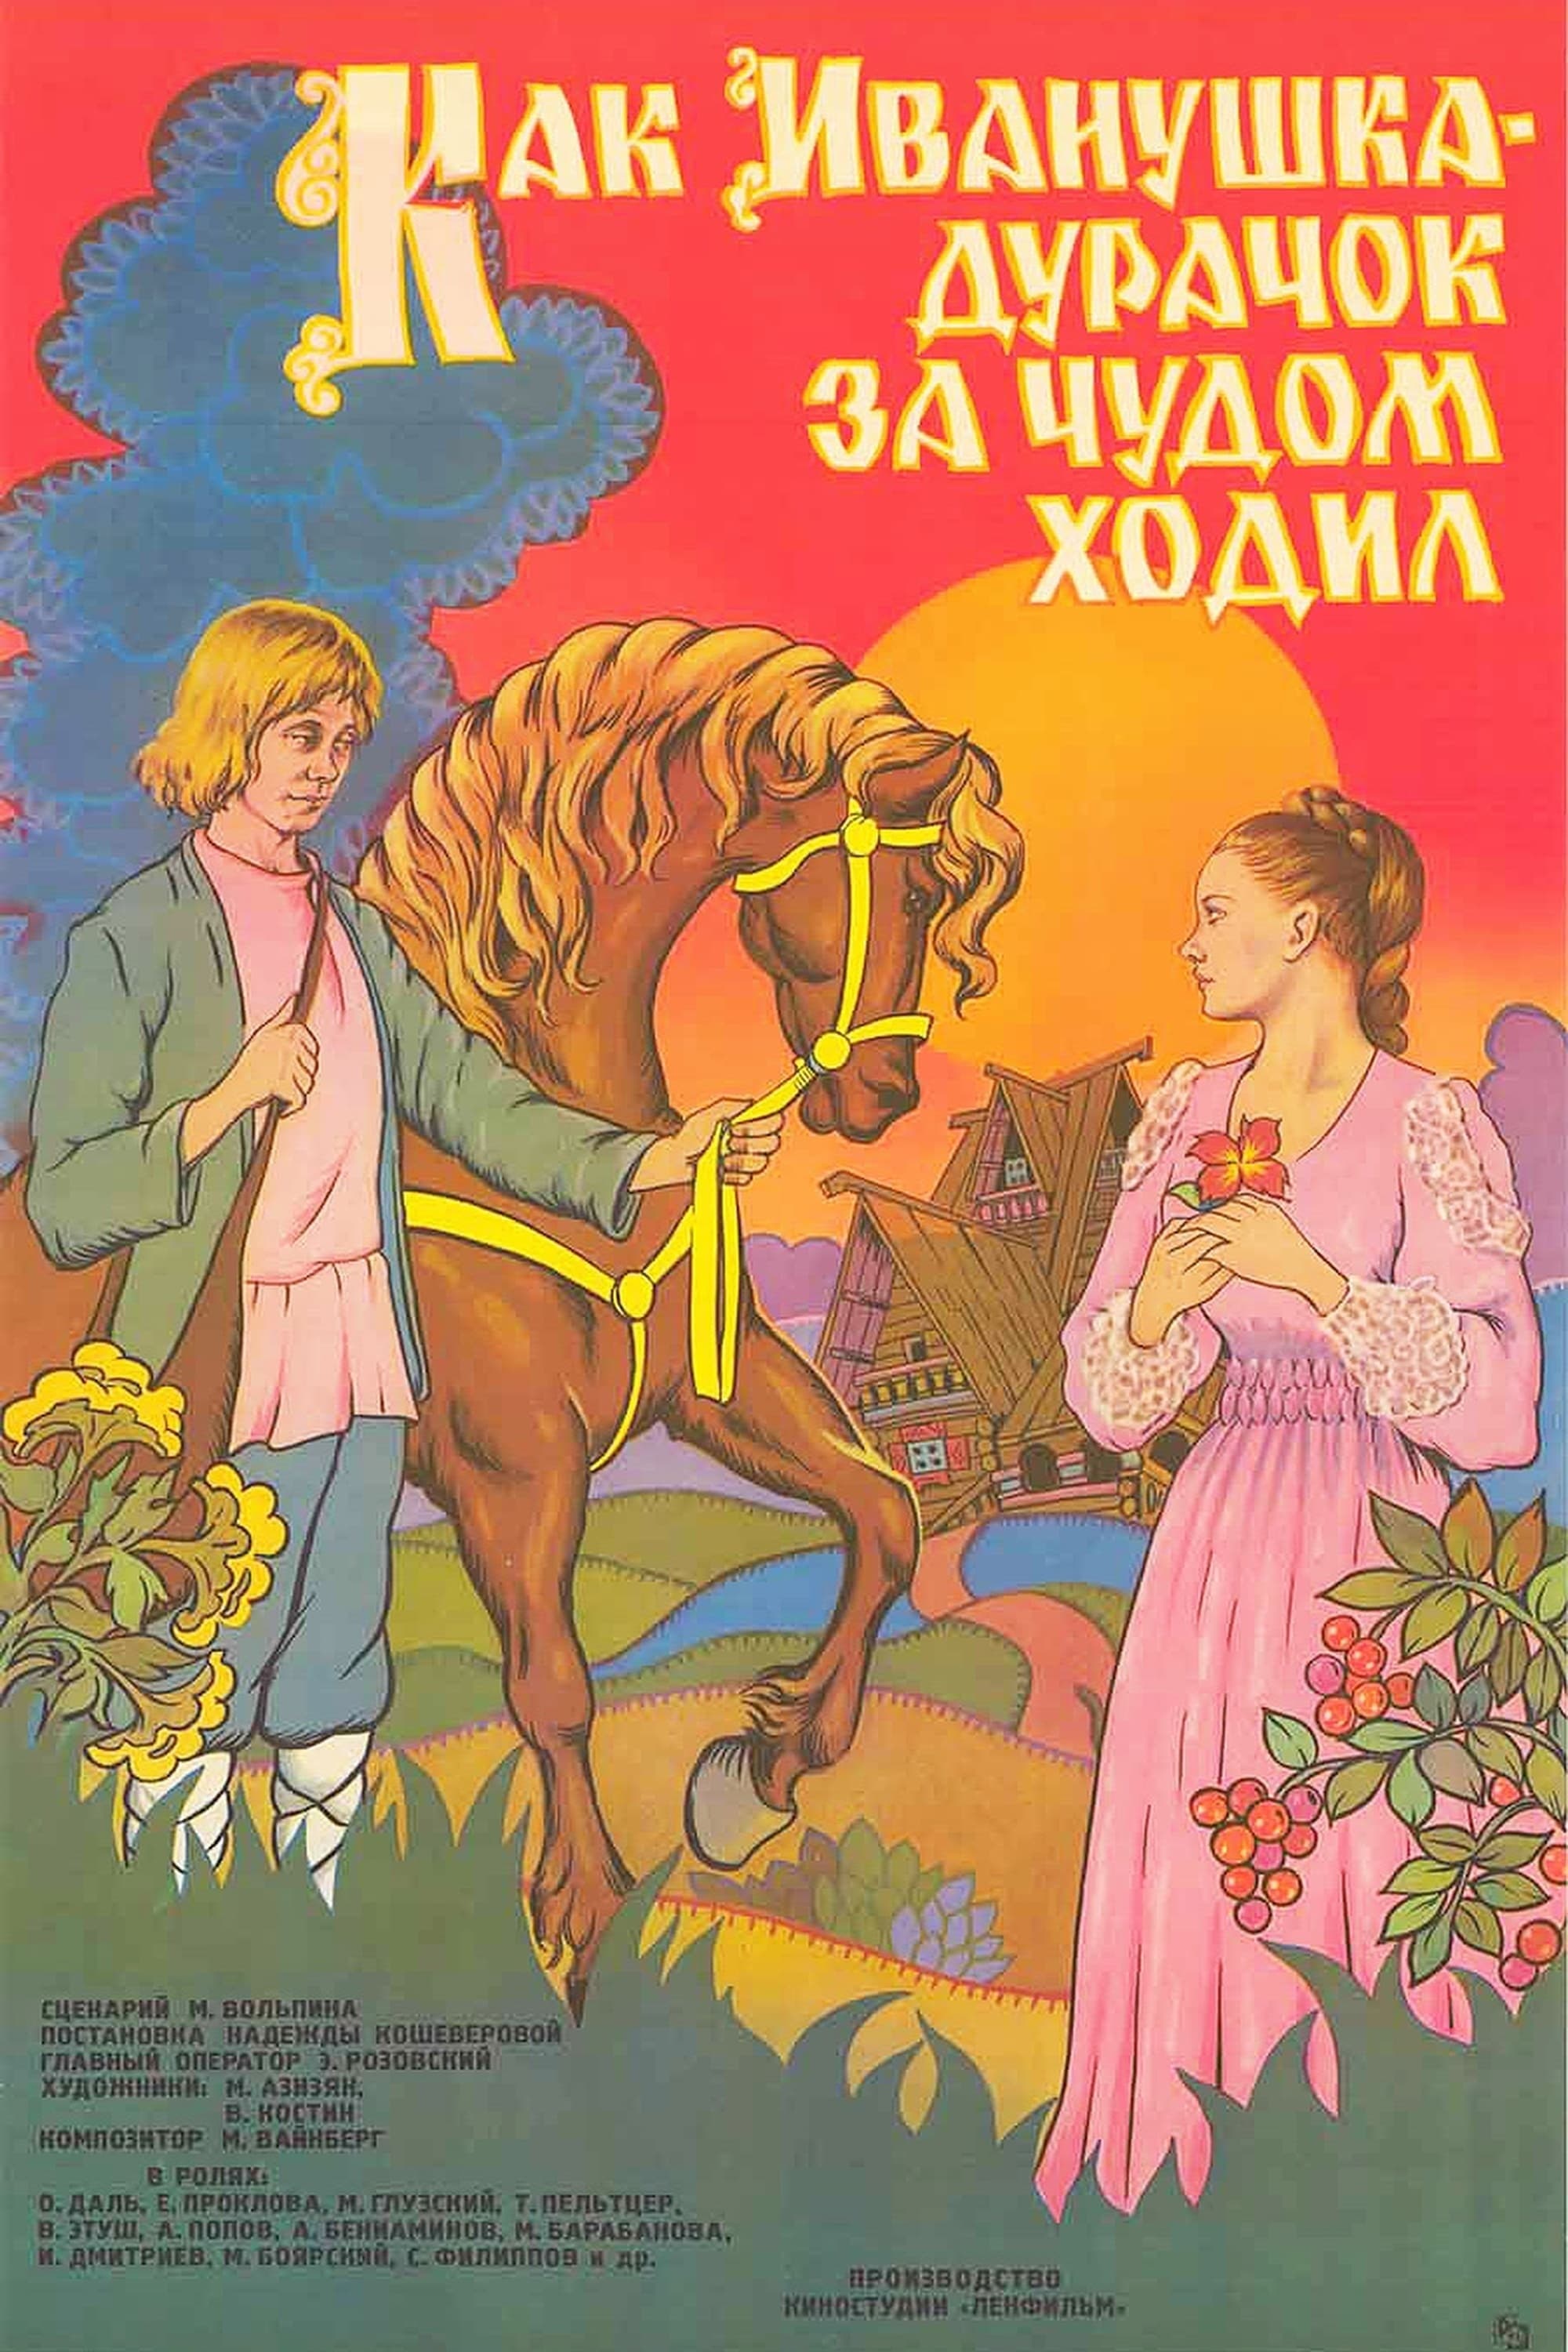 How Ivanushka the Fool Travelled in Search of Wonder (1977)